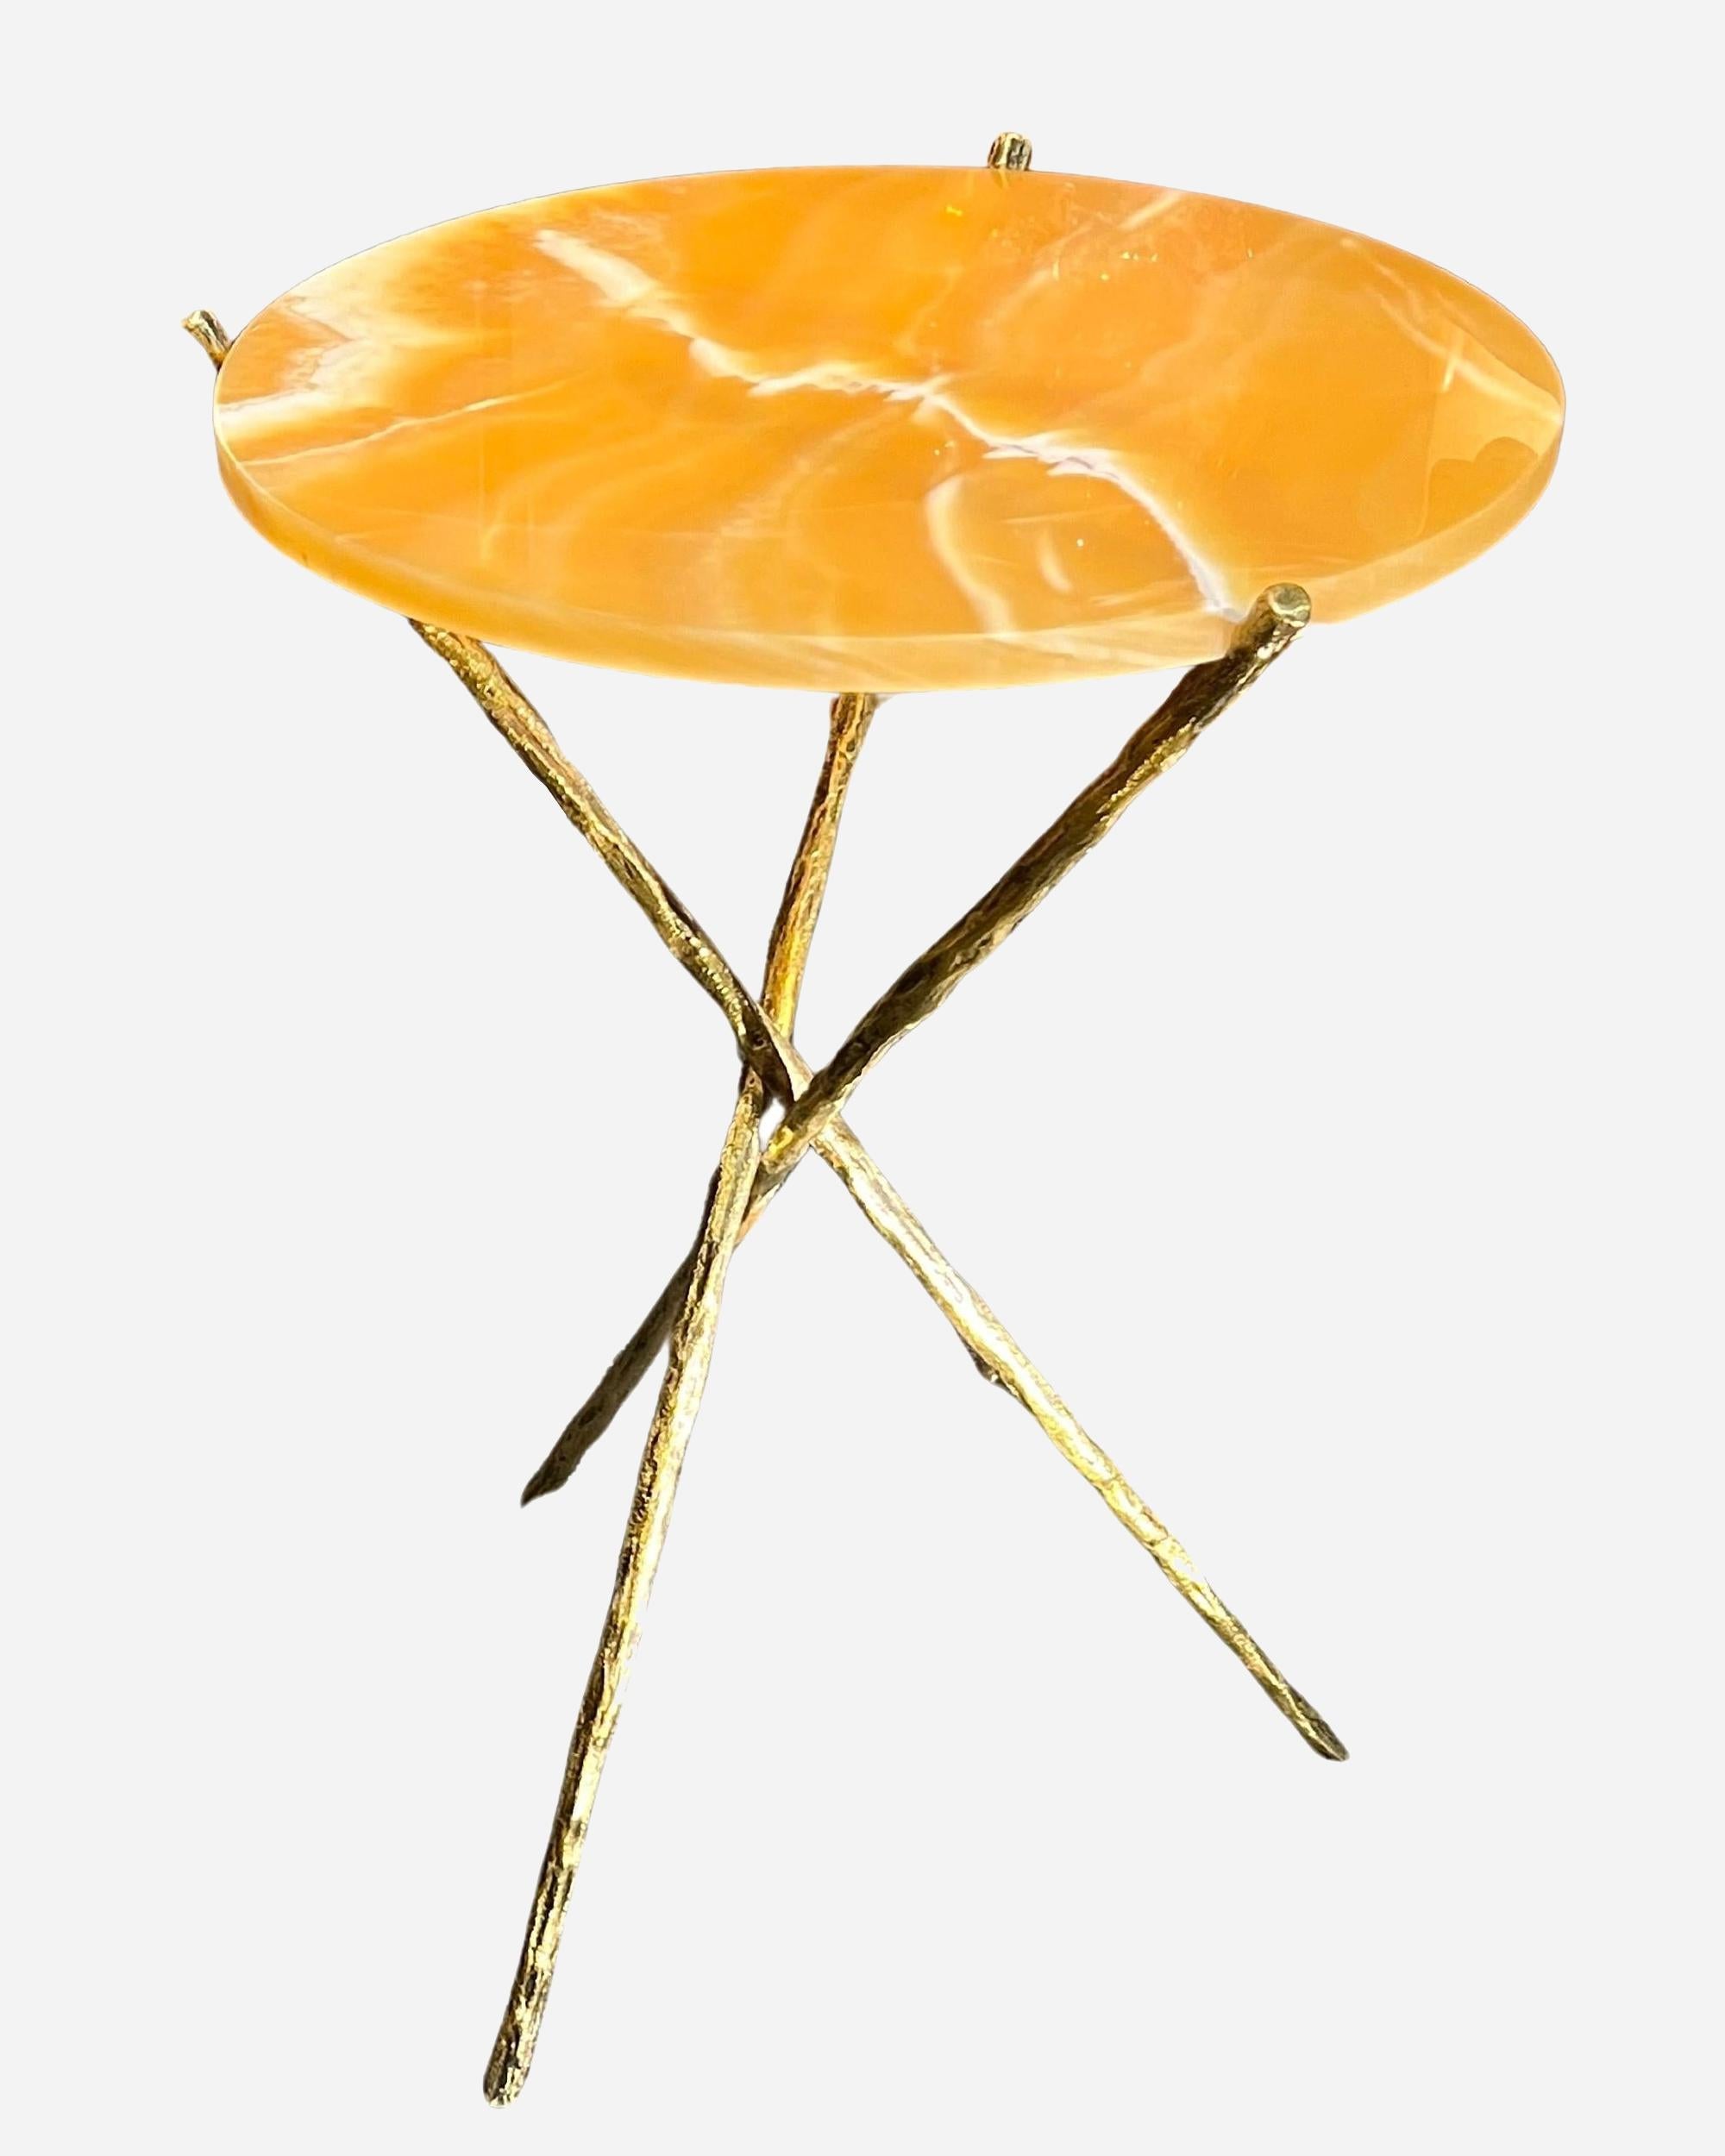 Nice pair of high pedestal tables, bronze tripod base in imitation of three crossed tree branches, round yellow onyx trays.

Limited edition.
Height : 75,5 cm (29.7 inches)
Diameter: 56,5 cm (22. 2 inches)
Trays height: 74,5 cm (29.3 inches)
Trays